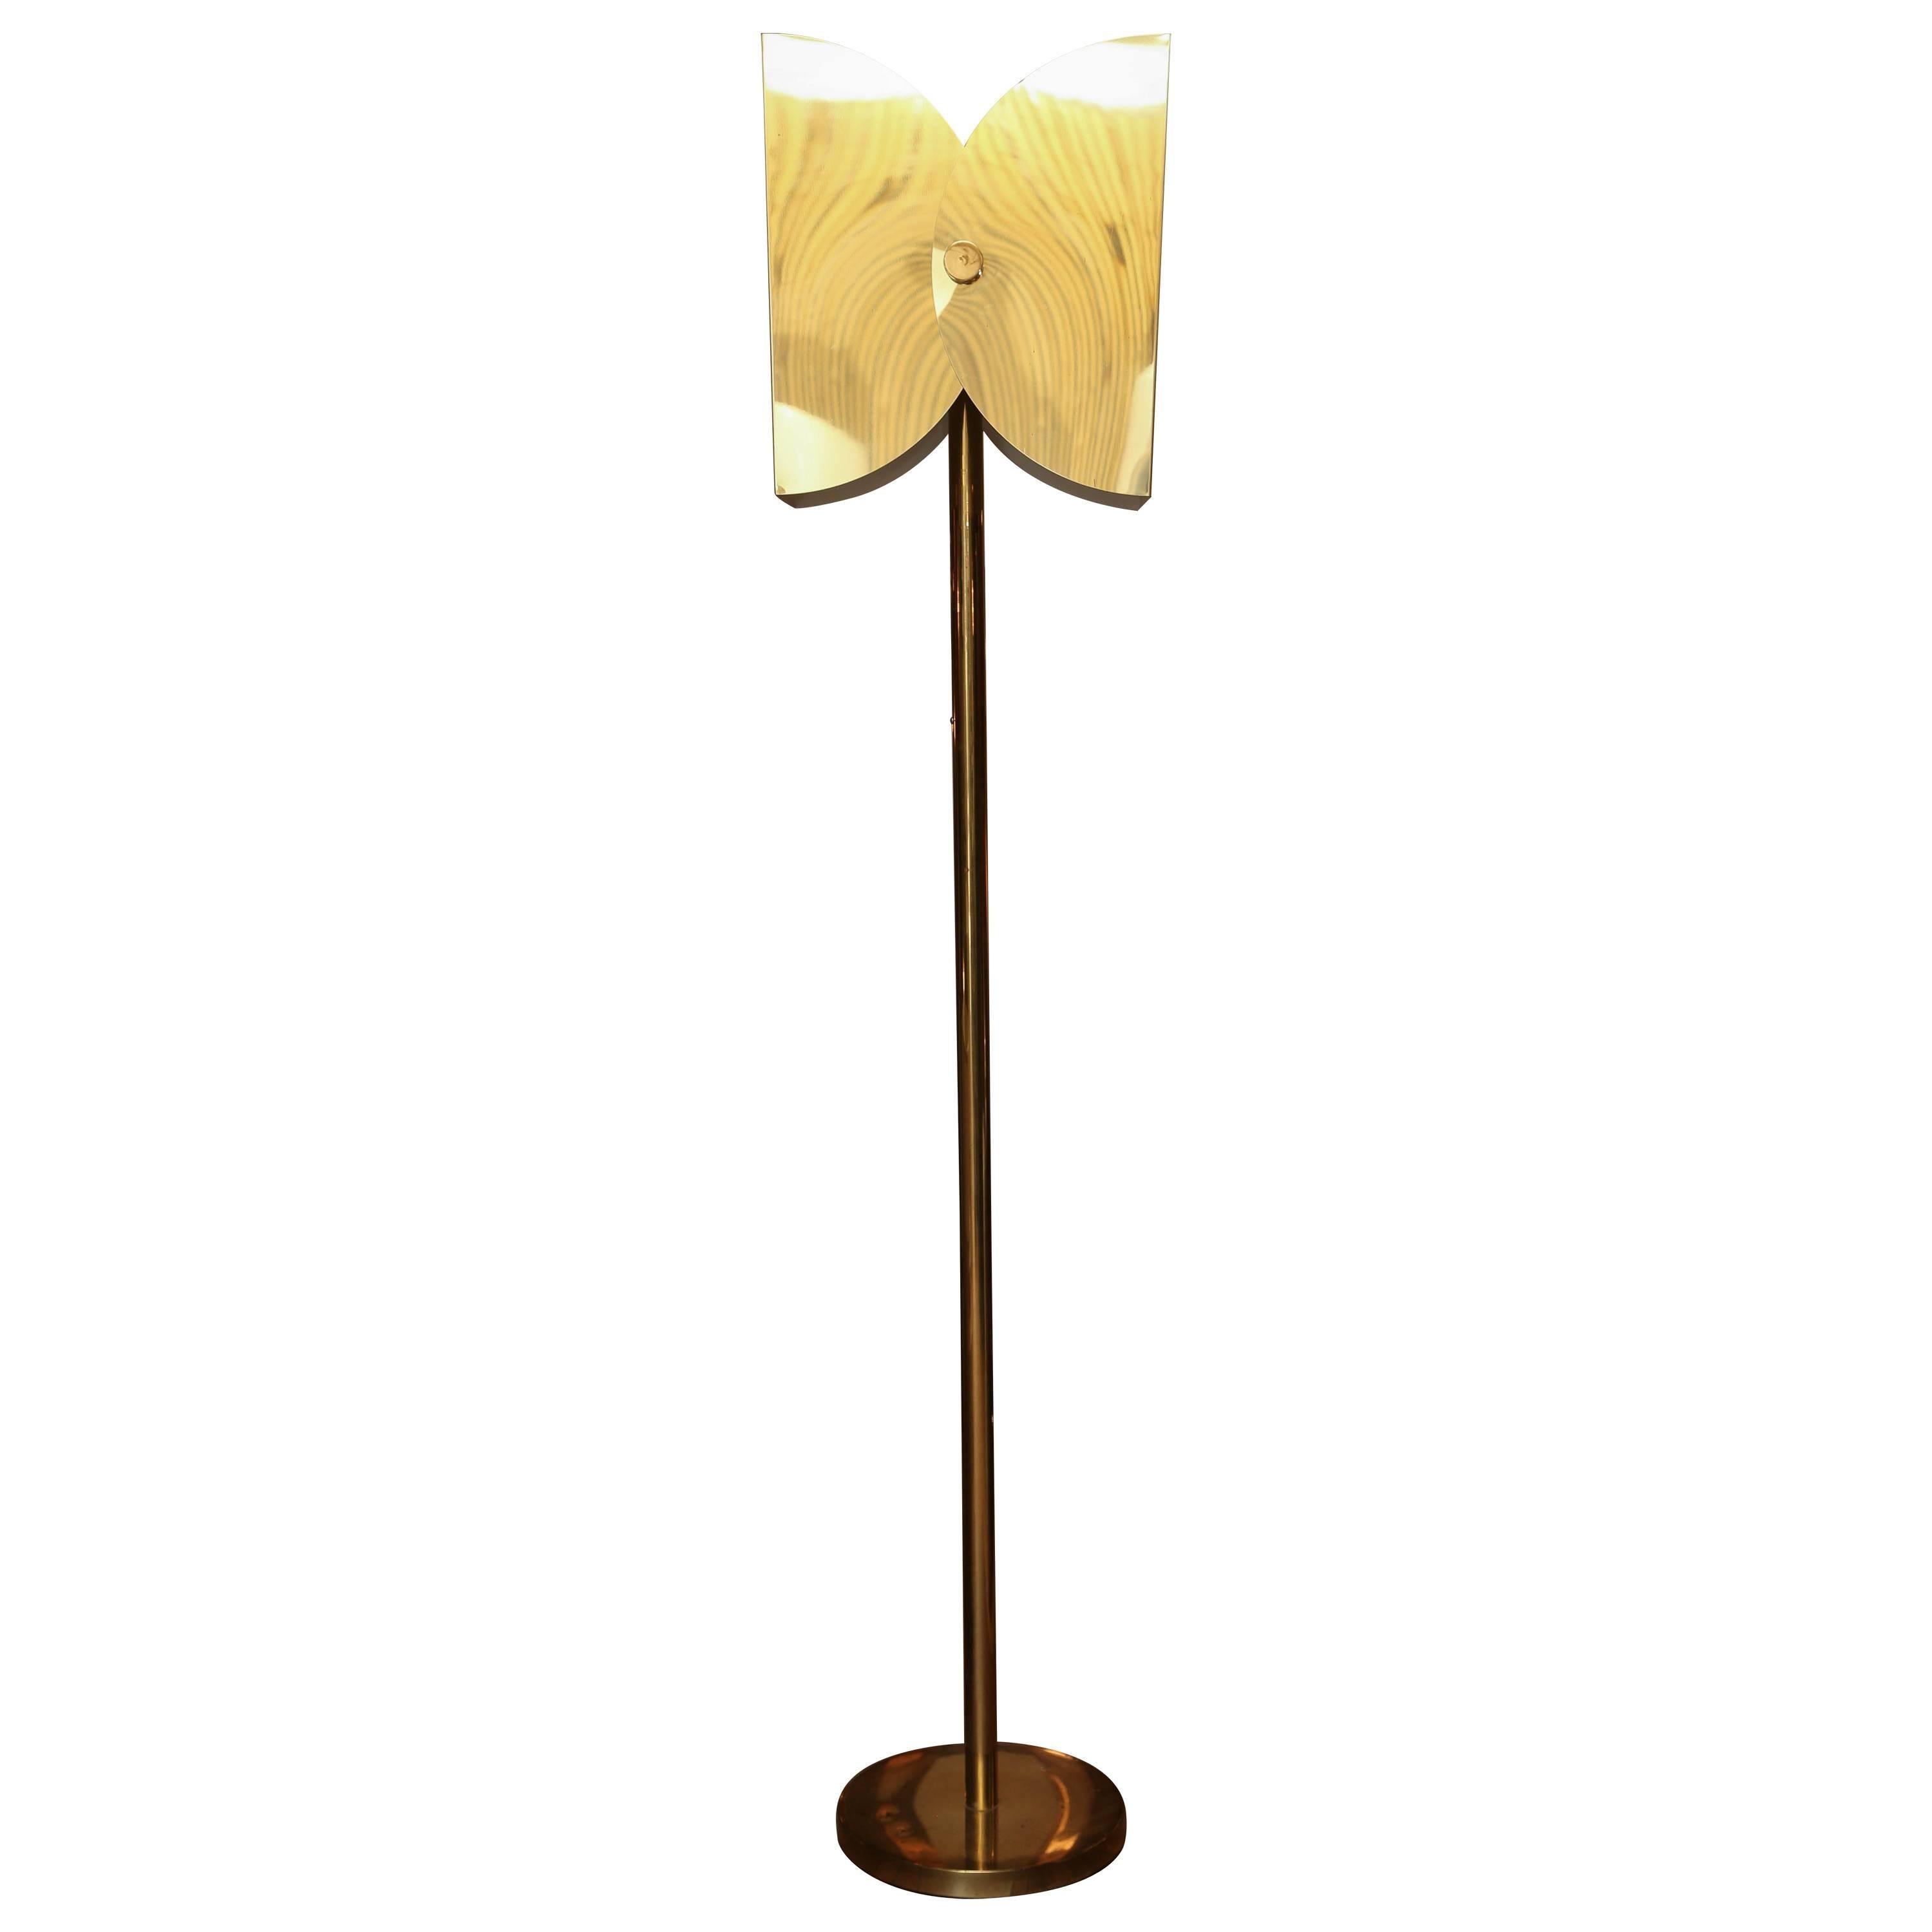 Superb Vintage Floor Lamp in Brass with a Vectored Hood by Koch & Lowy